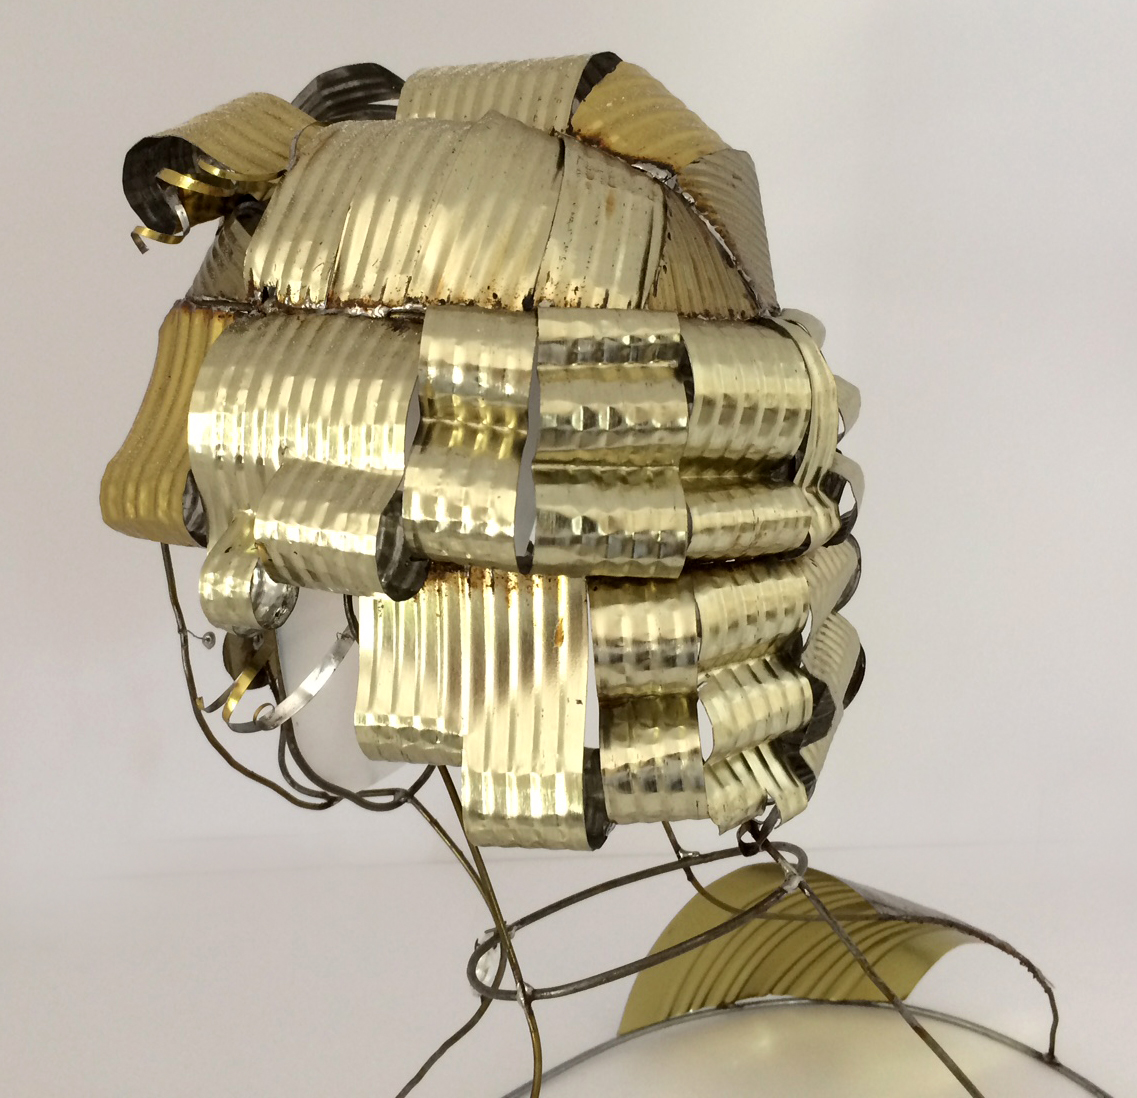   Wired Marilyn   Wire/Tin Sculpture.  16" x 14" x 10" 